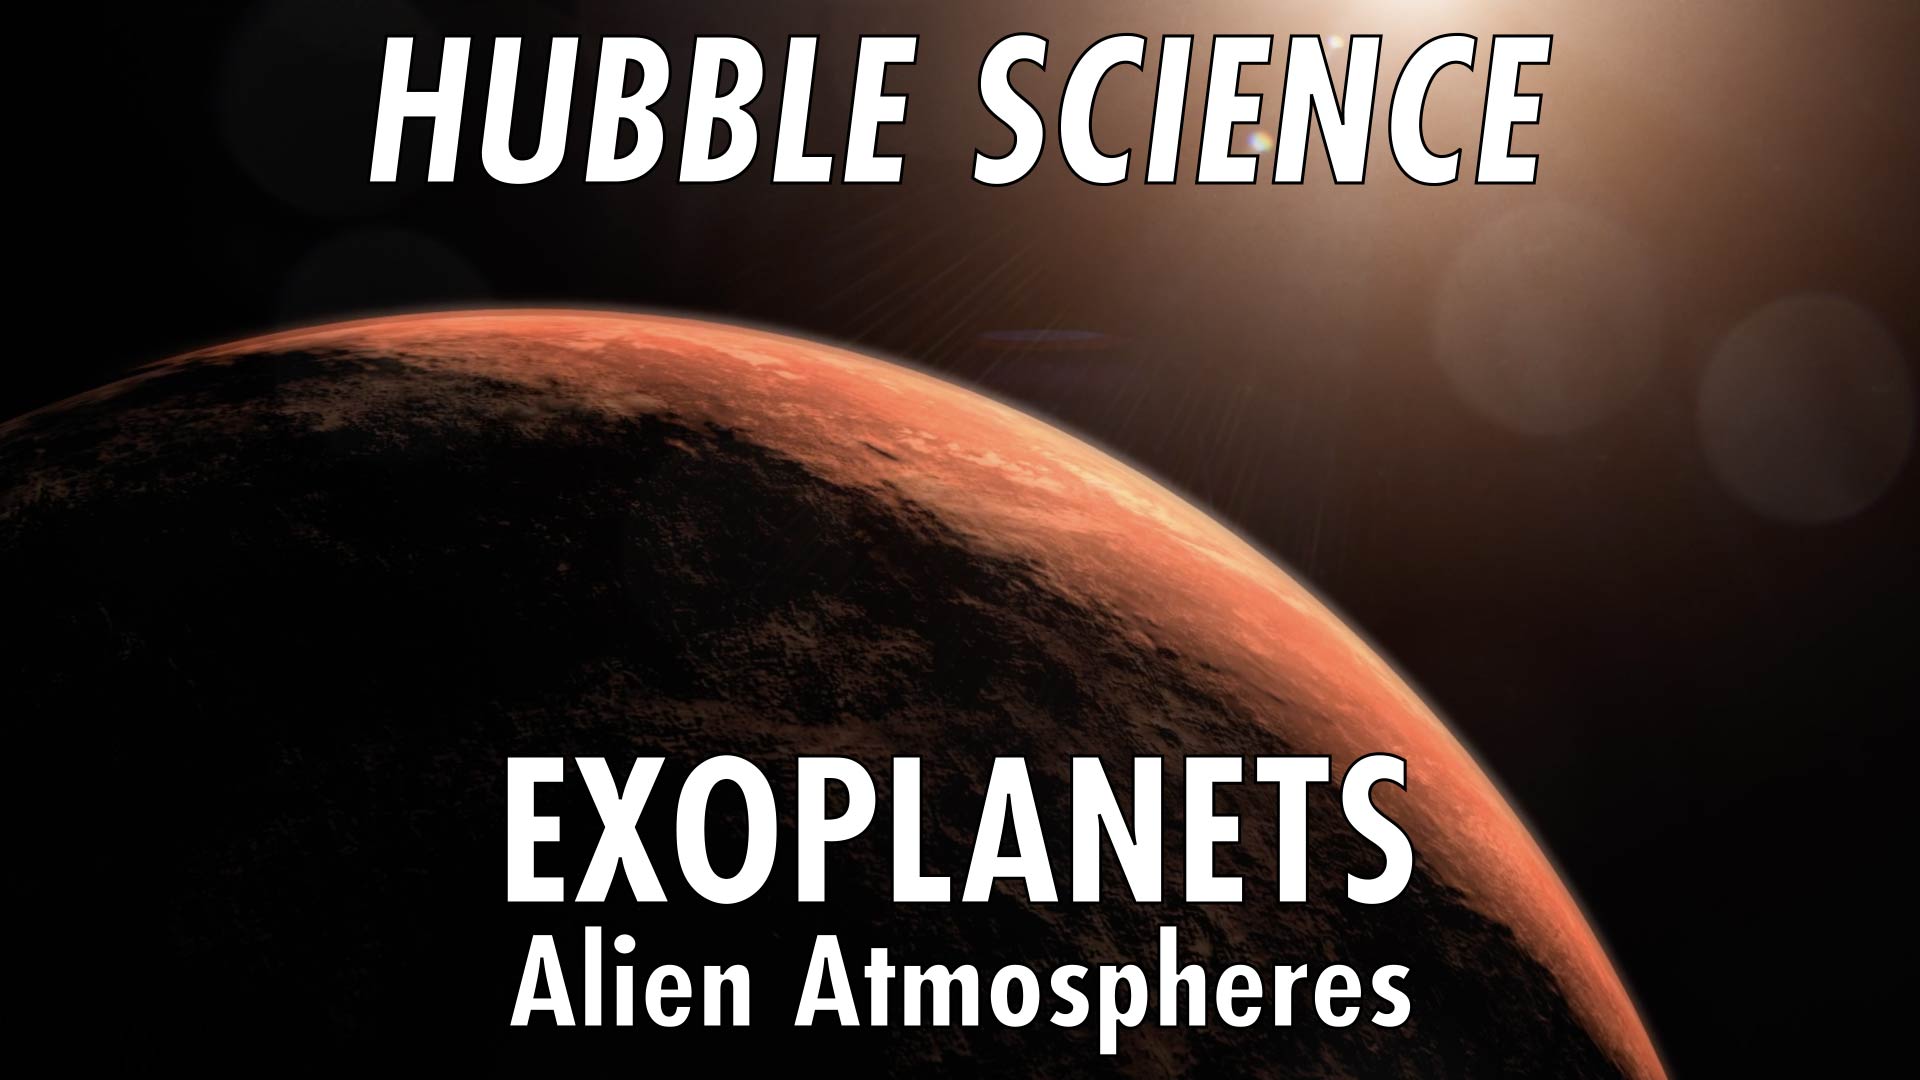 Preview Image for Hubble Science: Exoplanets, Alien Atmospheres